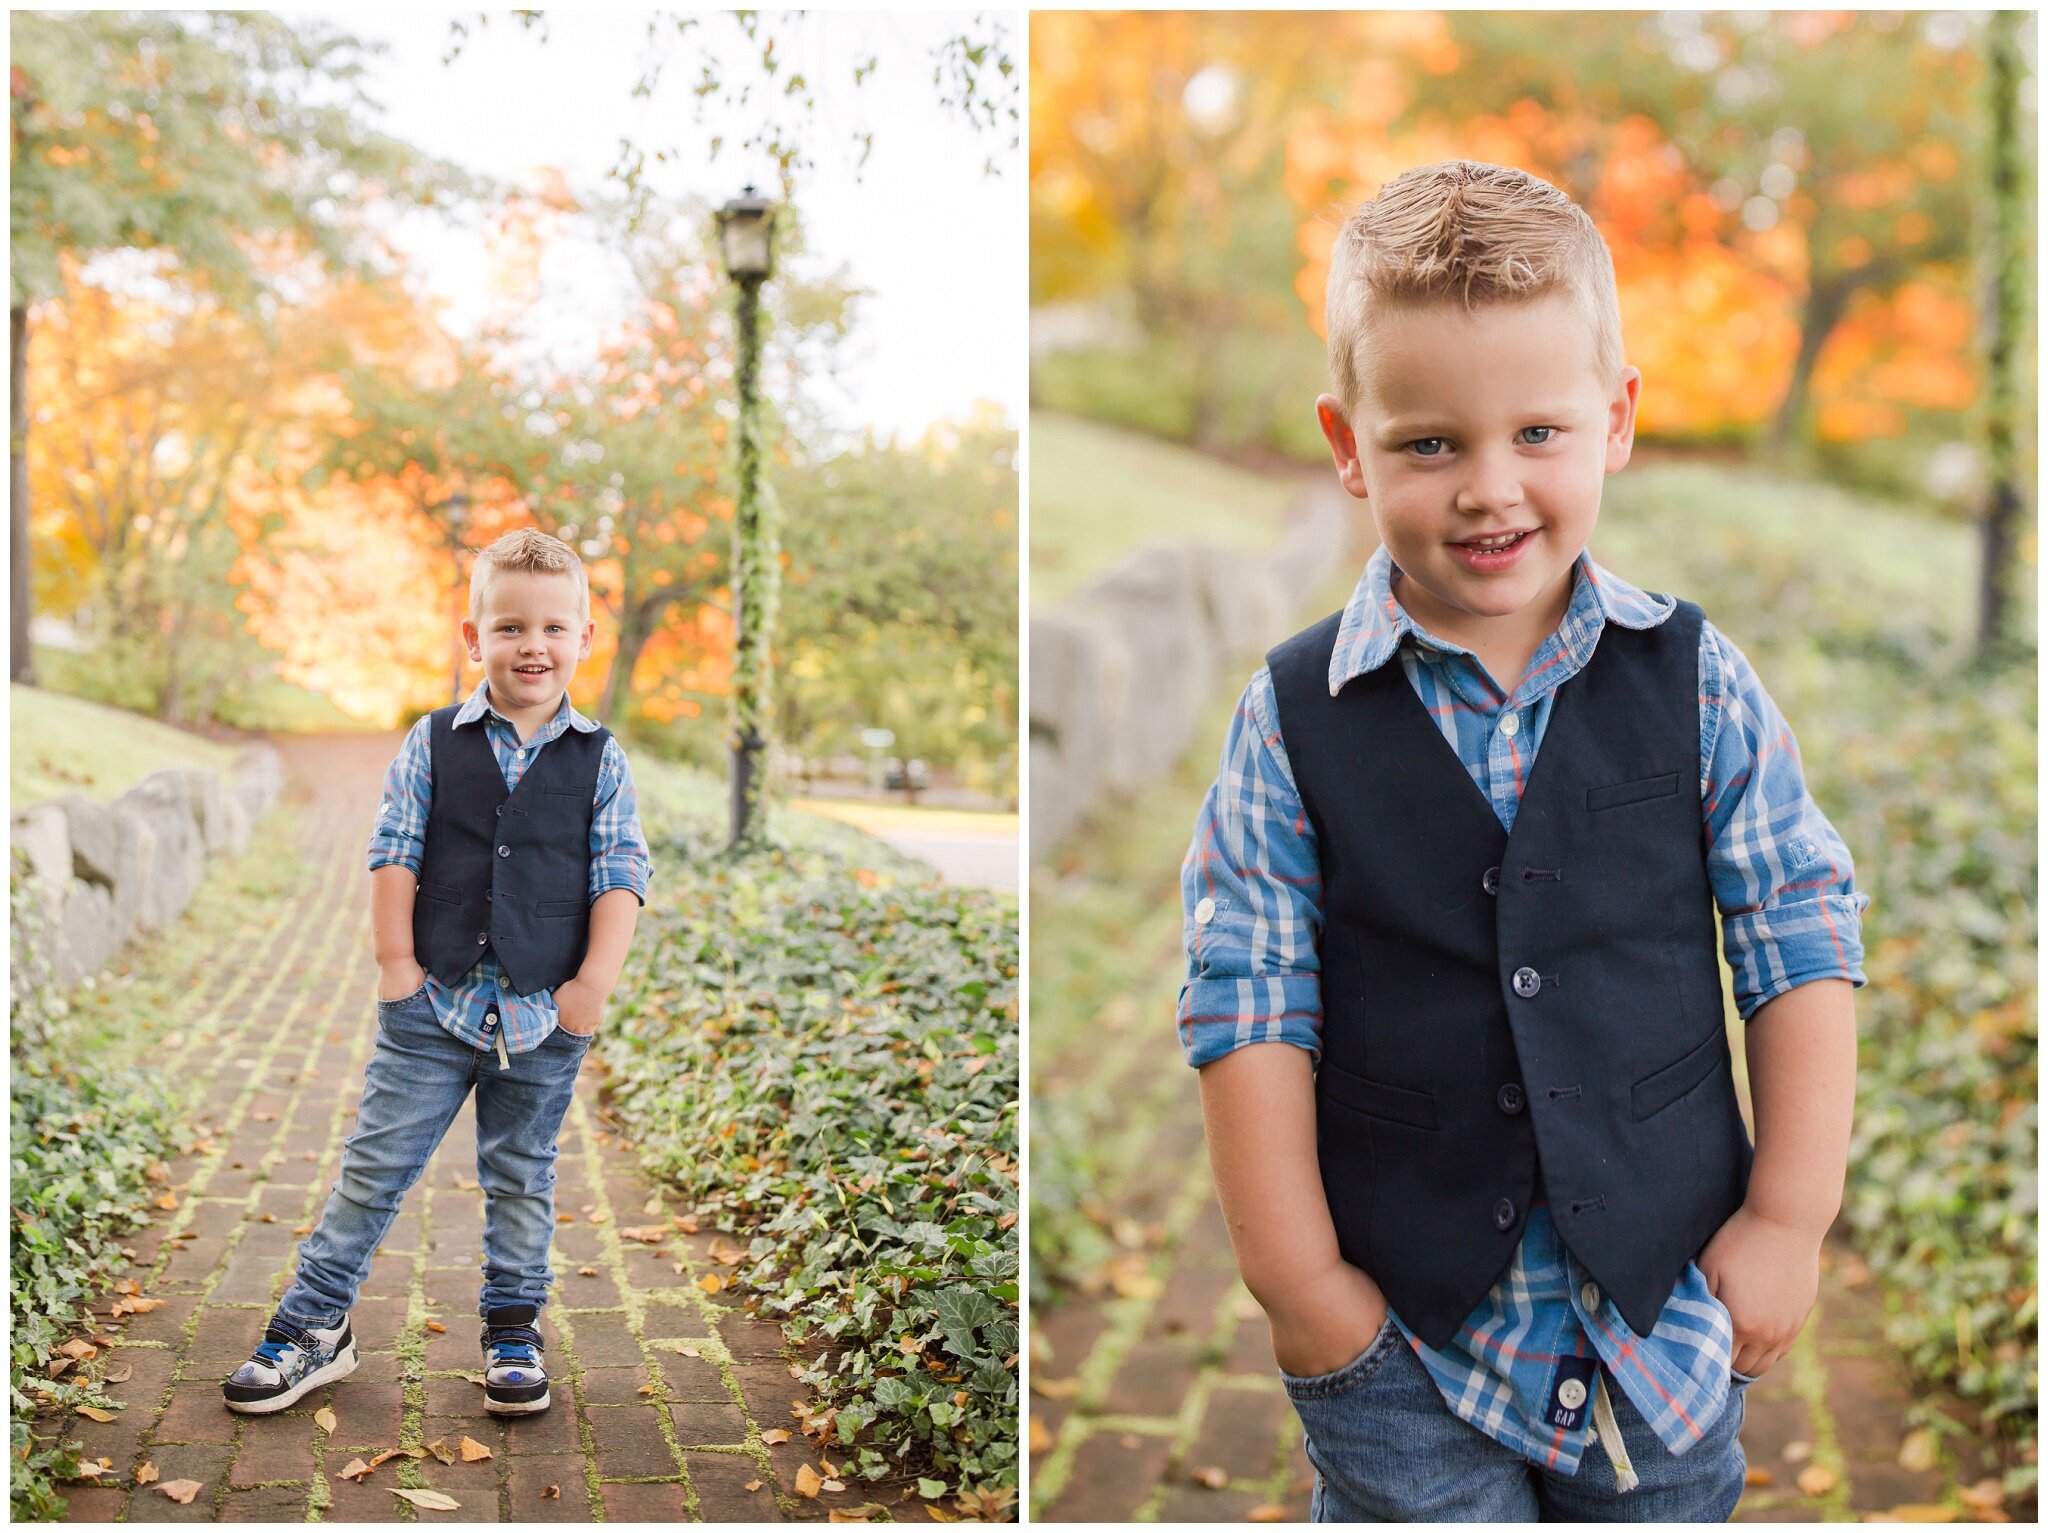 new hampshire family photographer - exeter nh